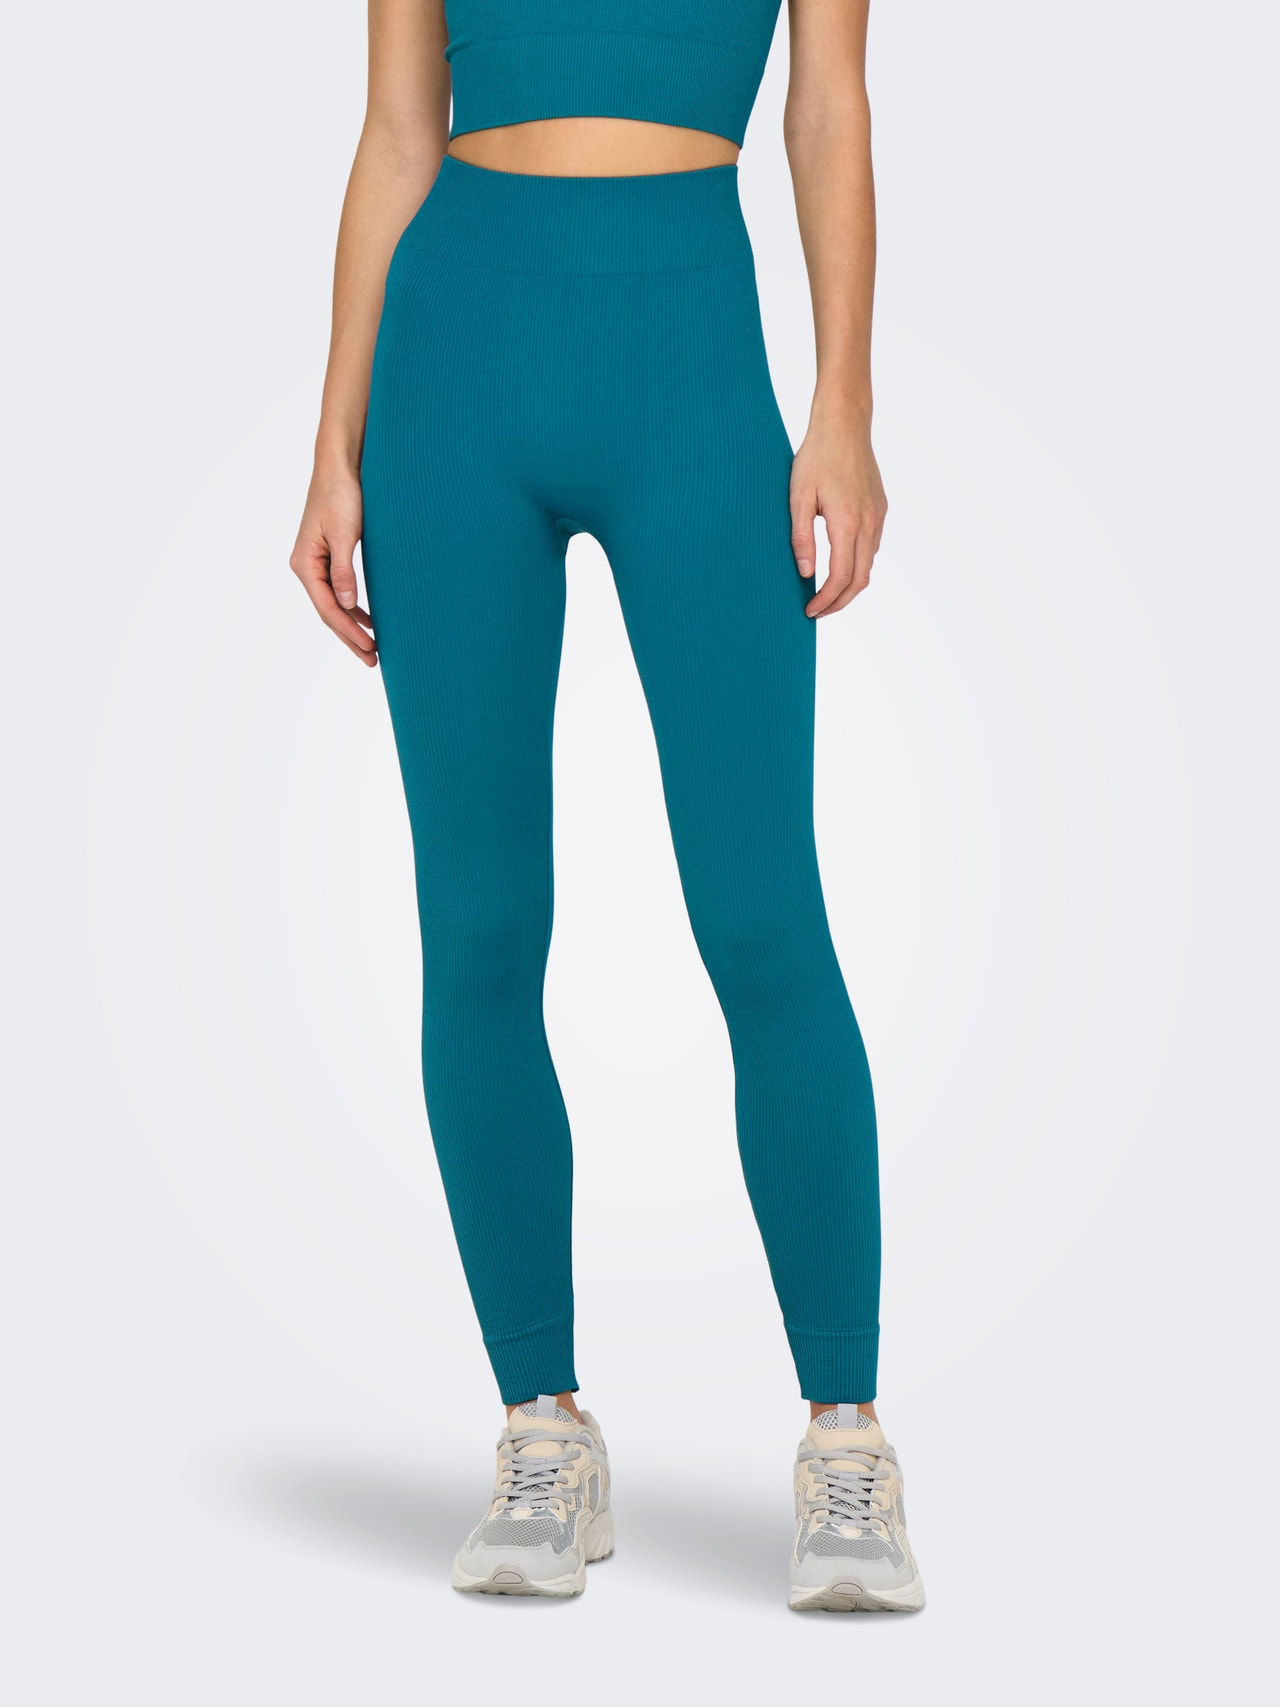 ONLY Tight fit High waist Legging -Dragonfly - 15250052